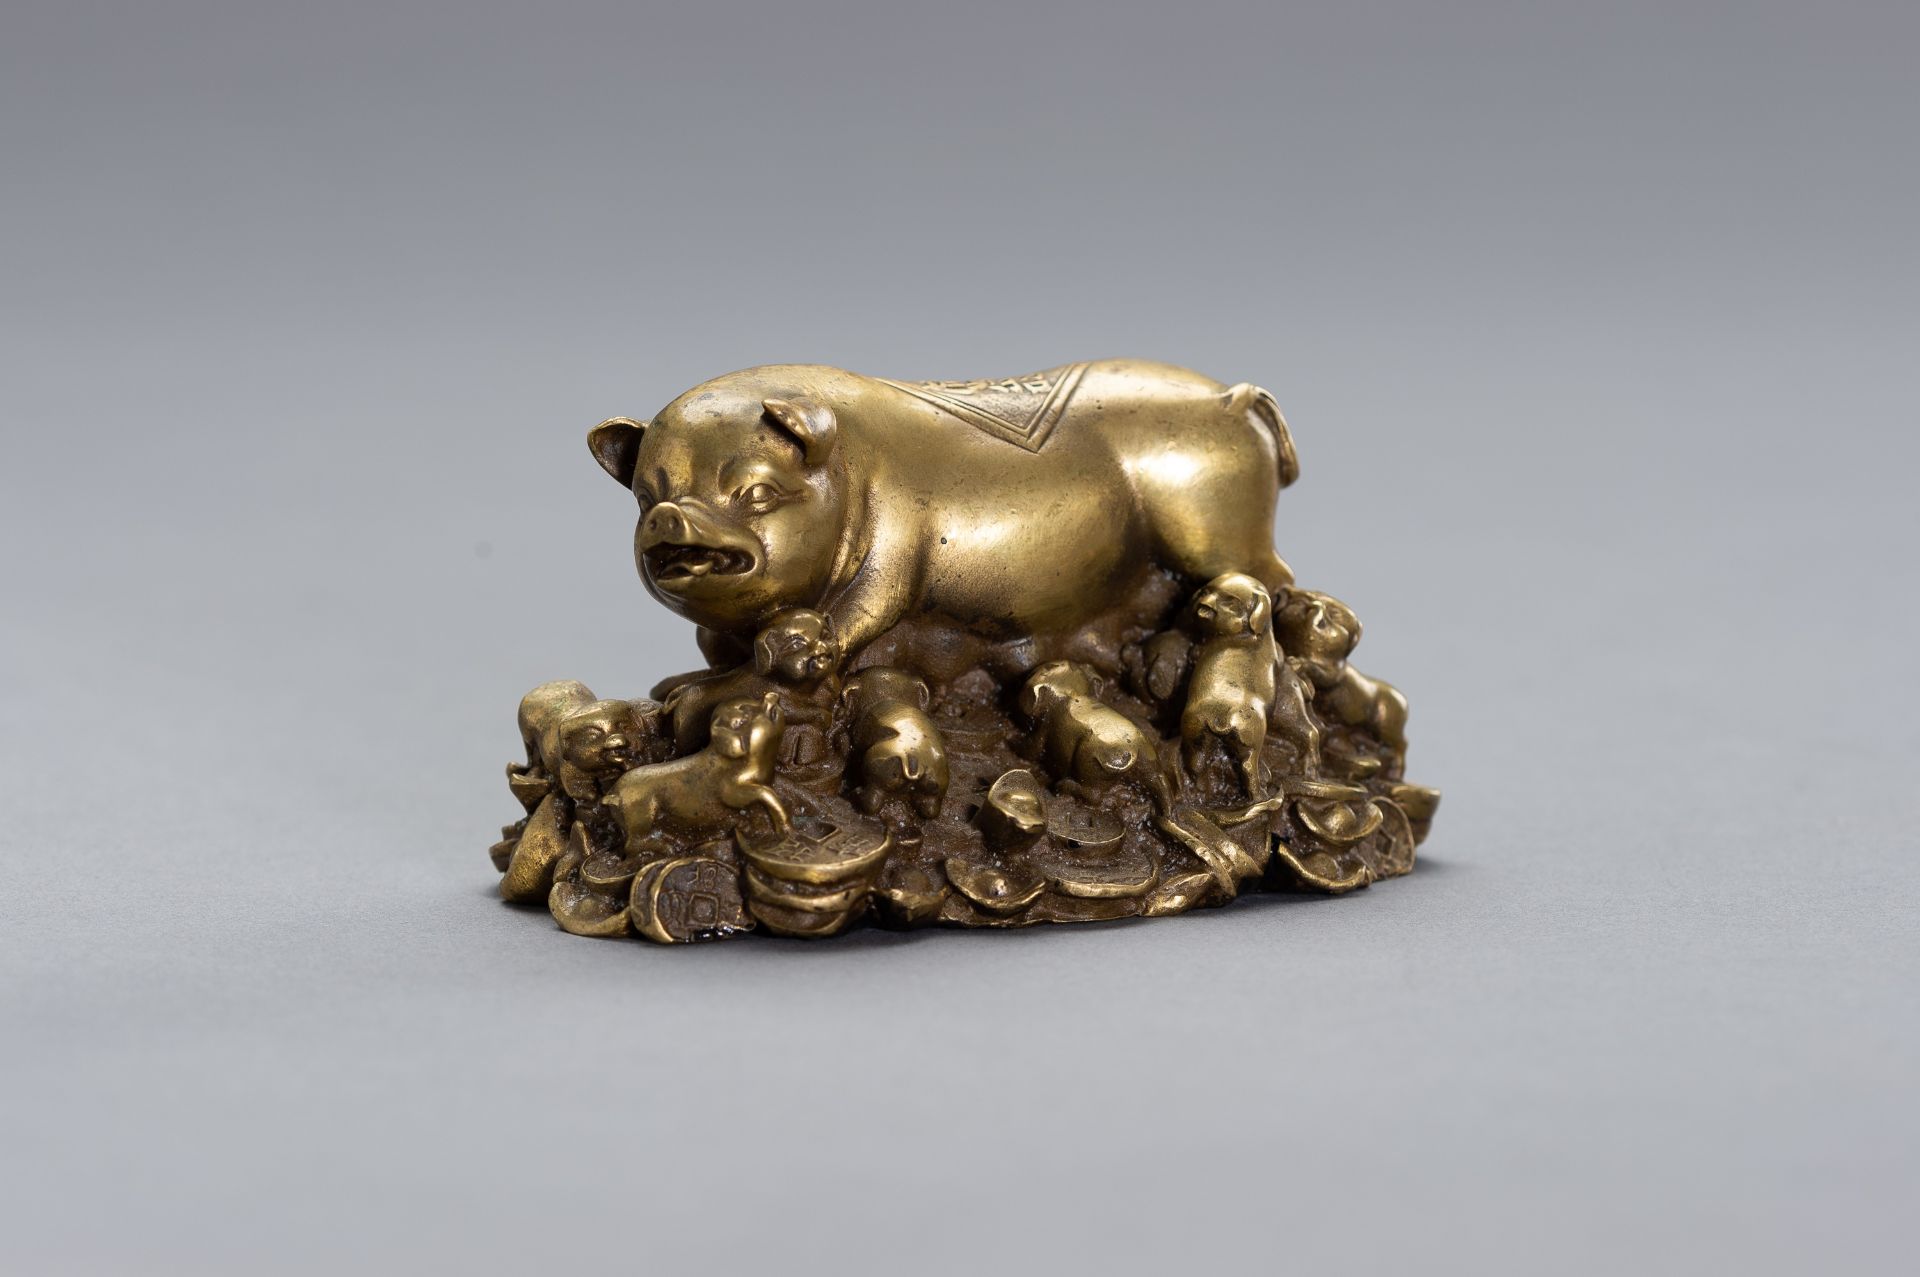 A BRONZE LUCKY CHARM OF A SOW WITH HER YOUNG